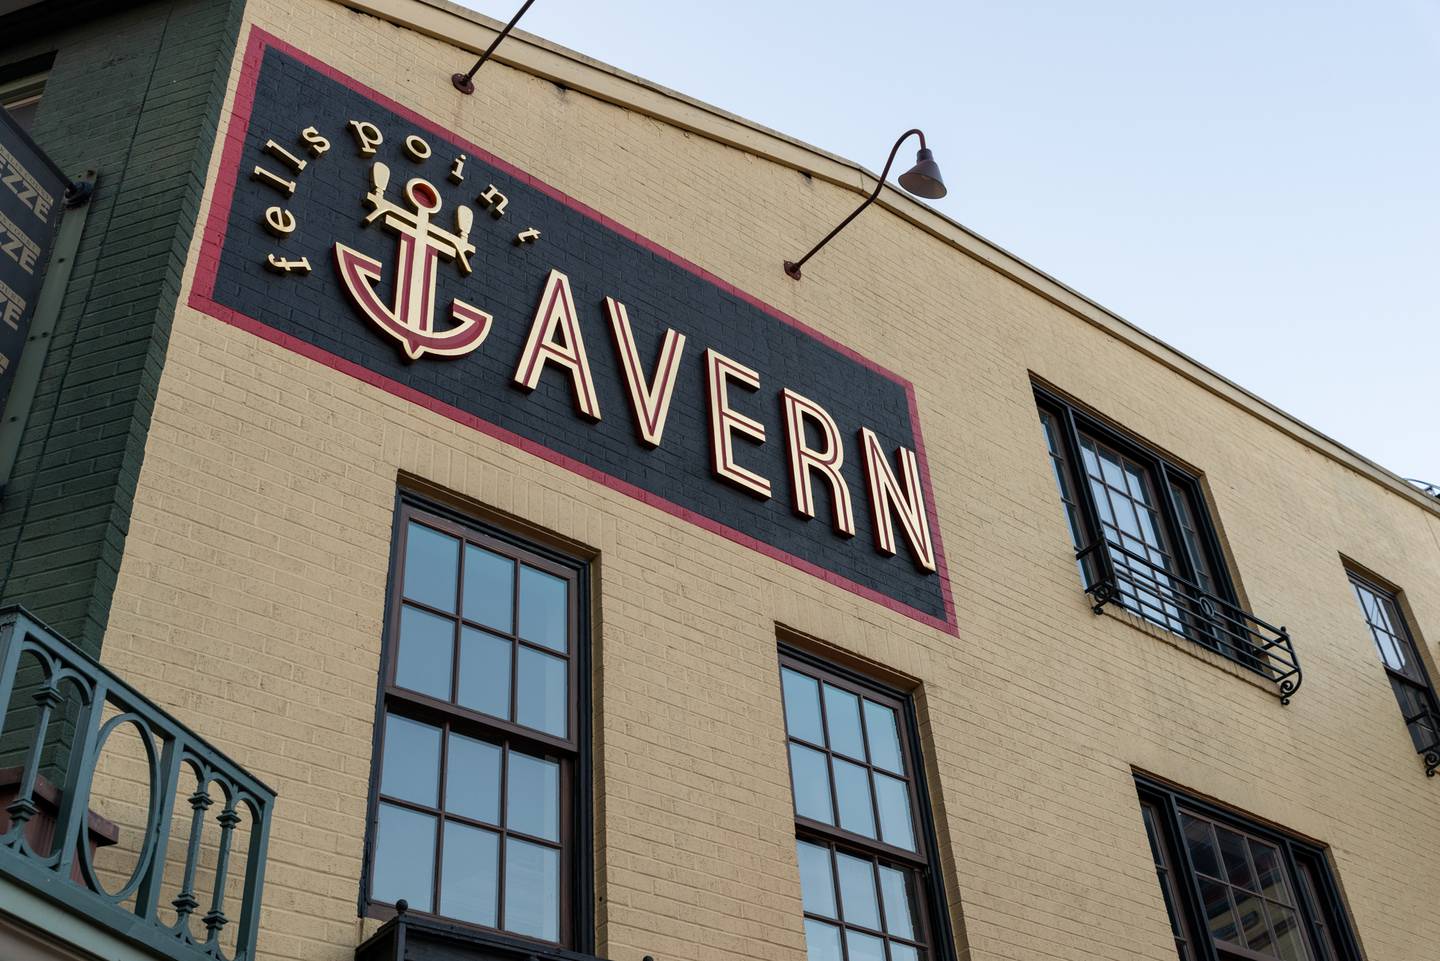 Fells Point Tavern in Fells Point, Baltimore, MD., closed unexpectedly.